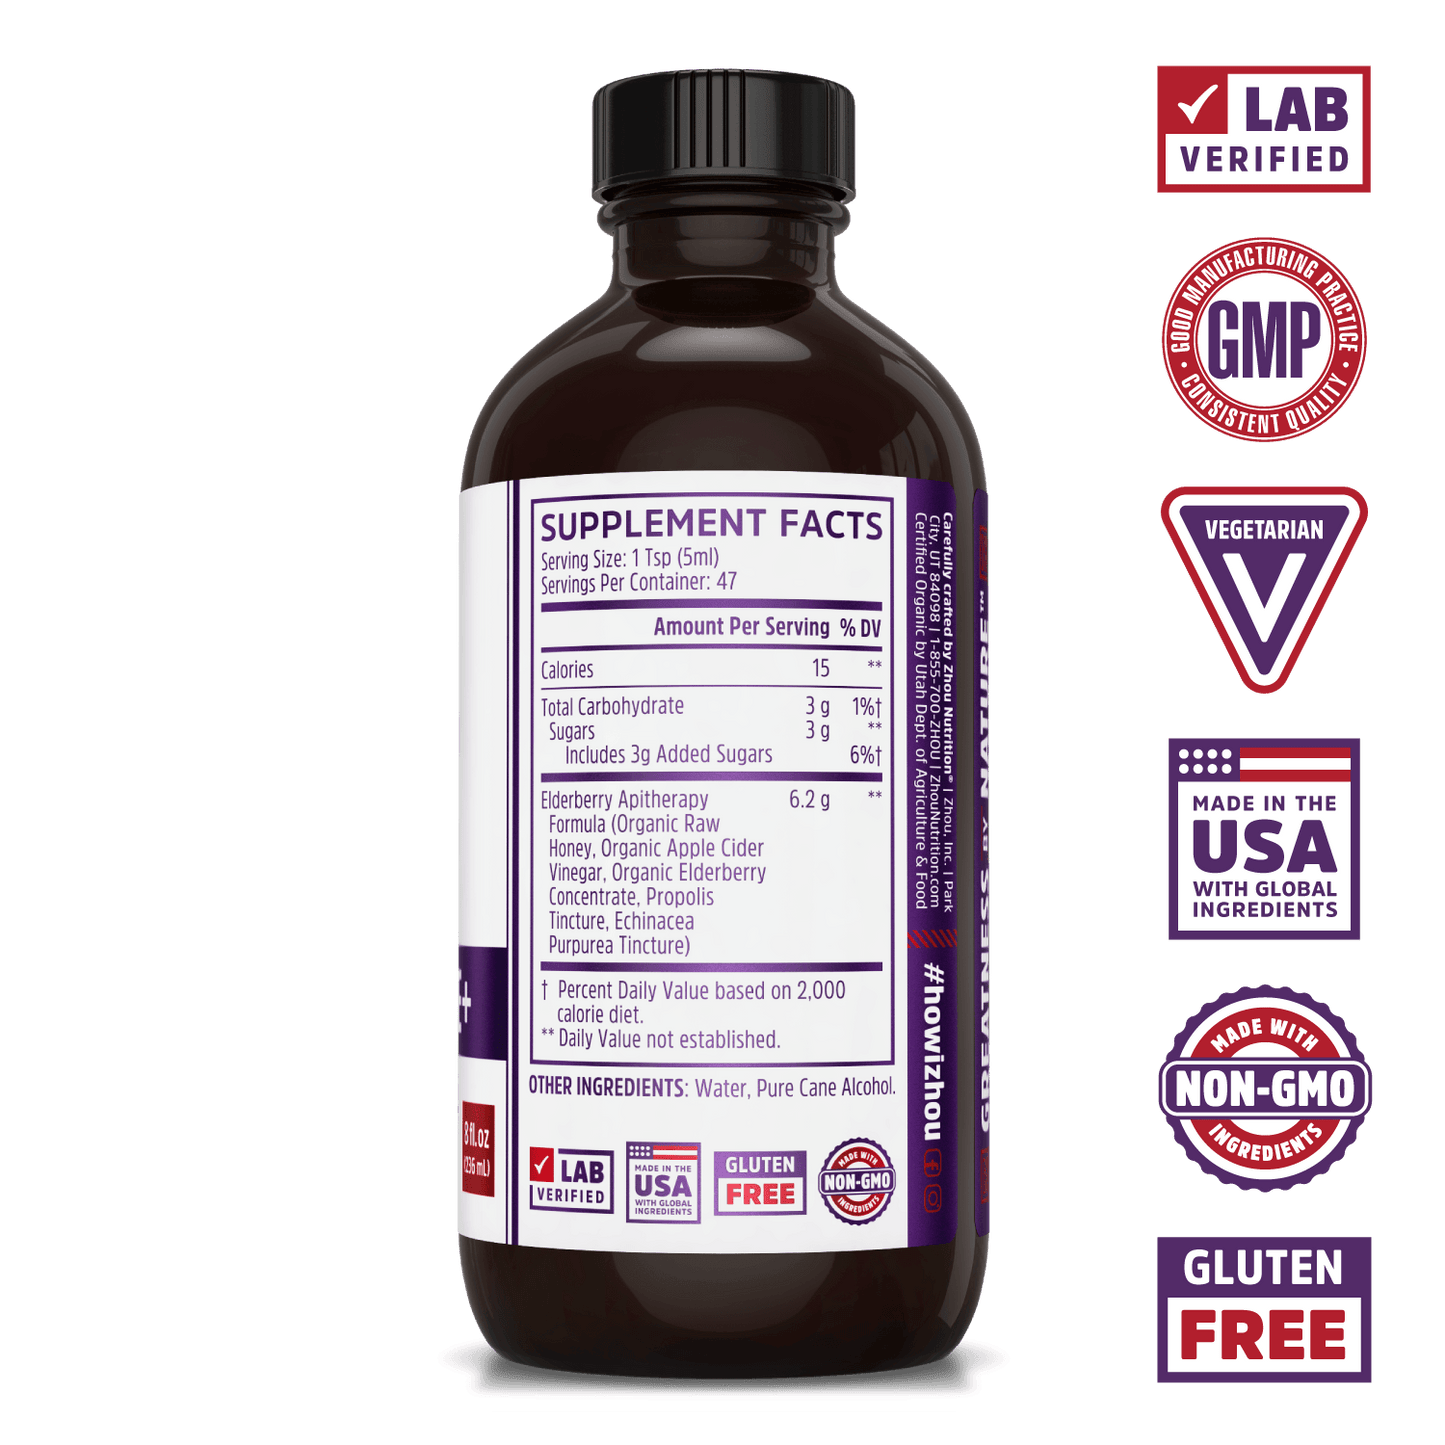 Zhou Nutrition Elderberry Syrup with Raw Honey and Apple Cider Vinegar. Bottle side. Lab verified, good manufacturing practices, vegetarian, made in the USA with global ingredients, made with non-GMO ingredients, gluten free.